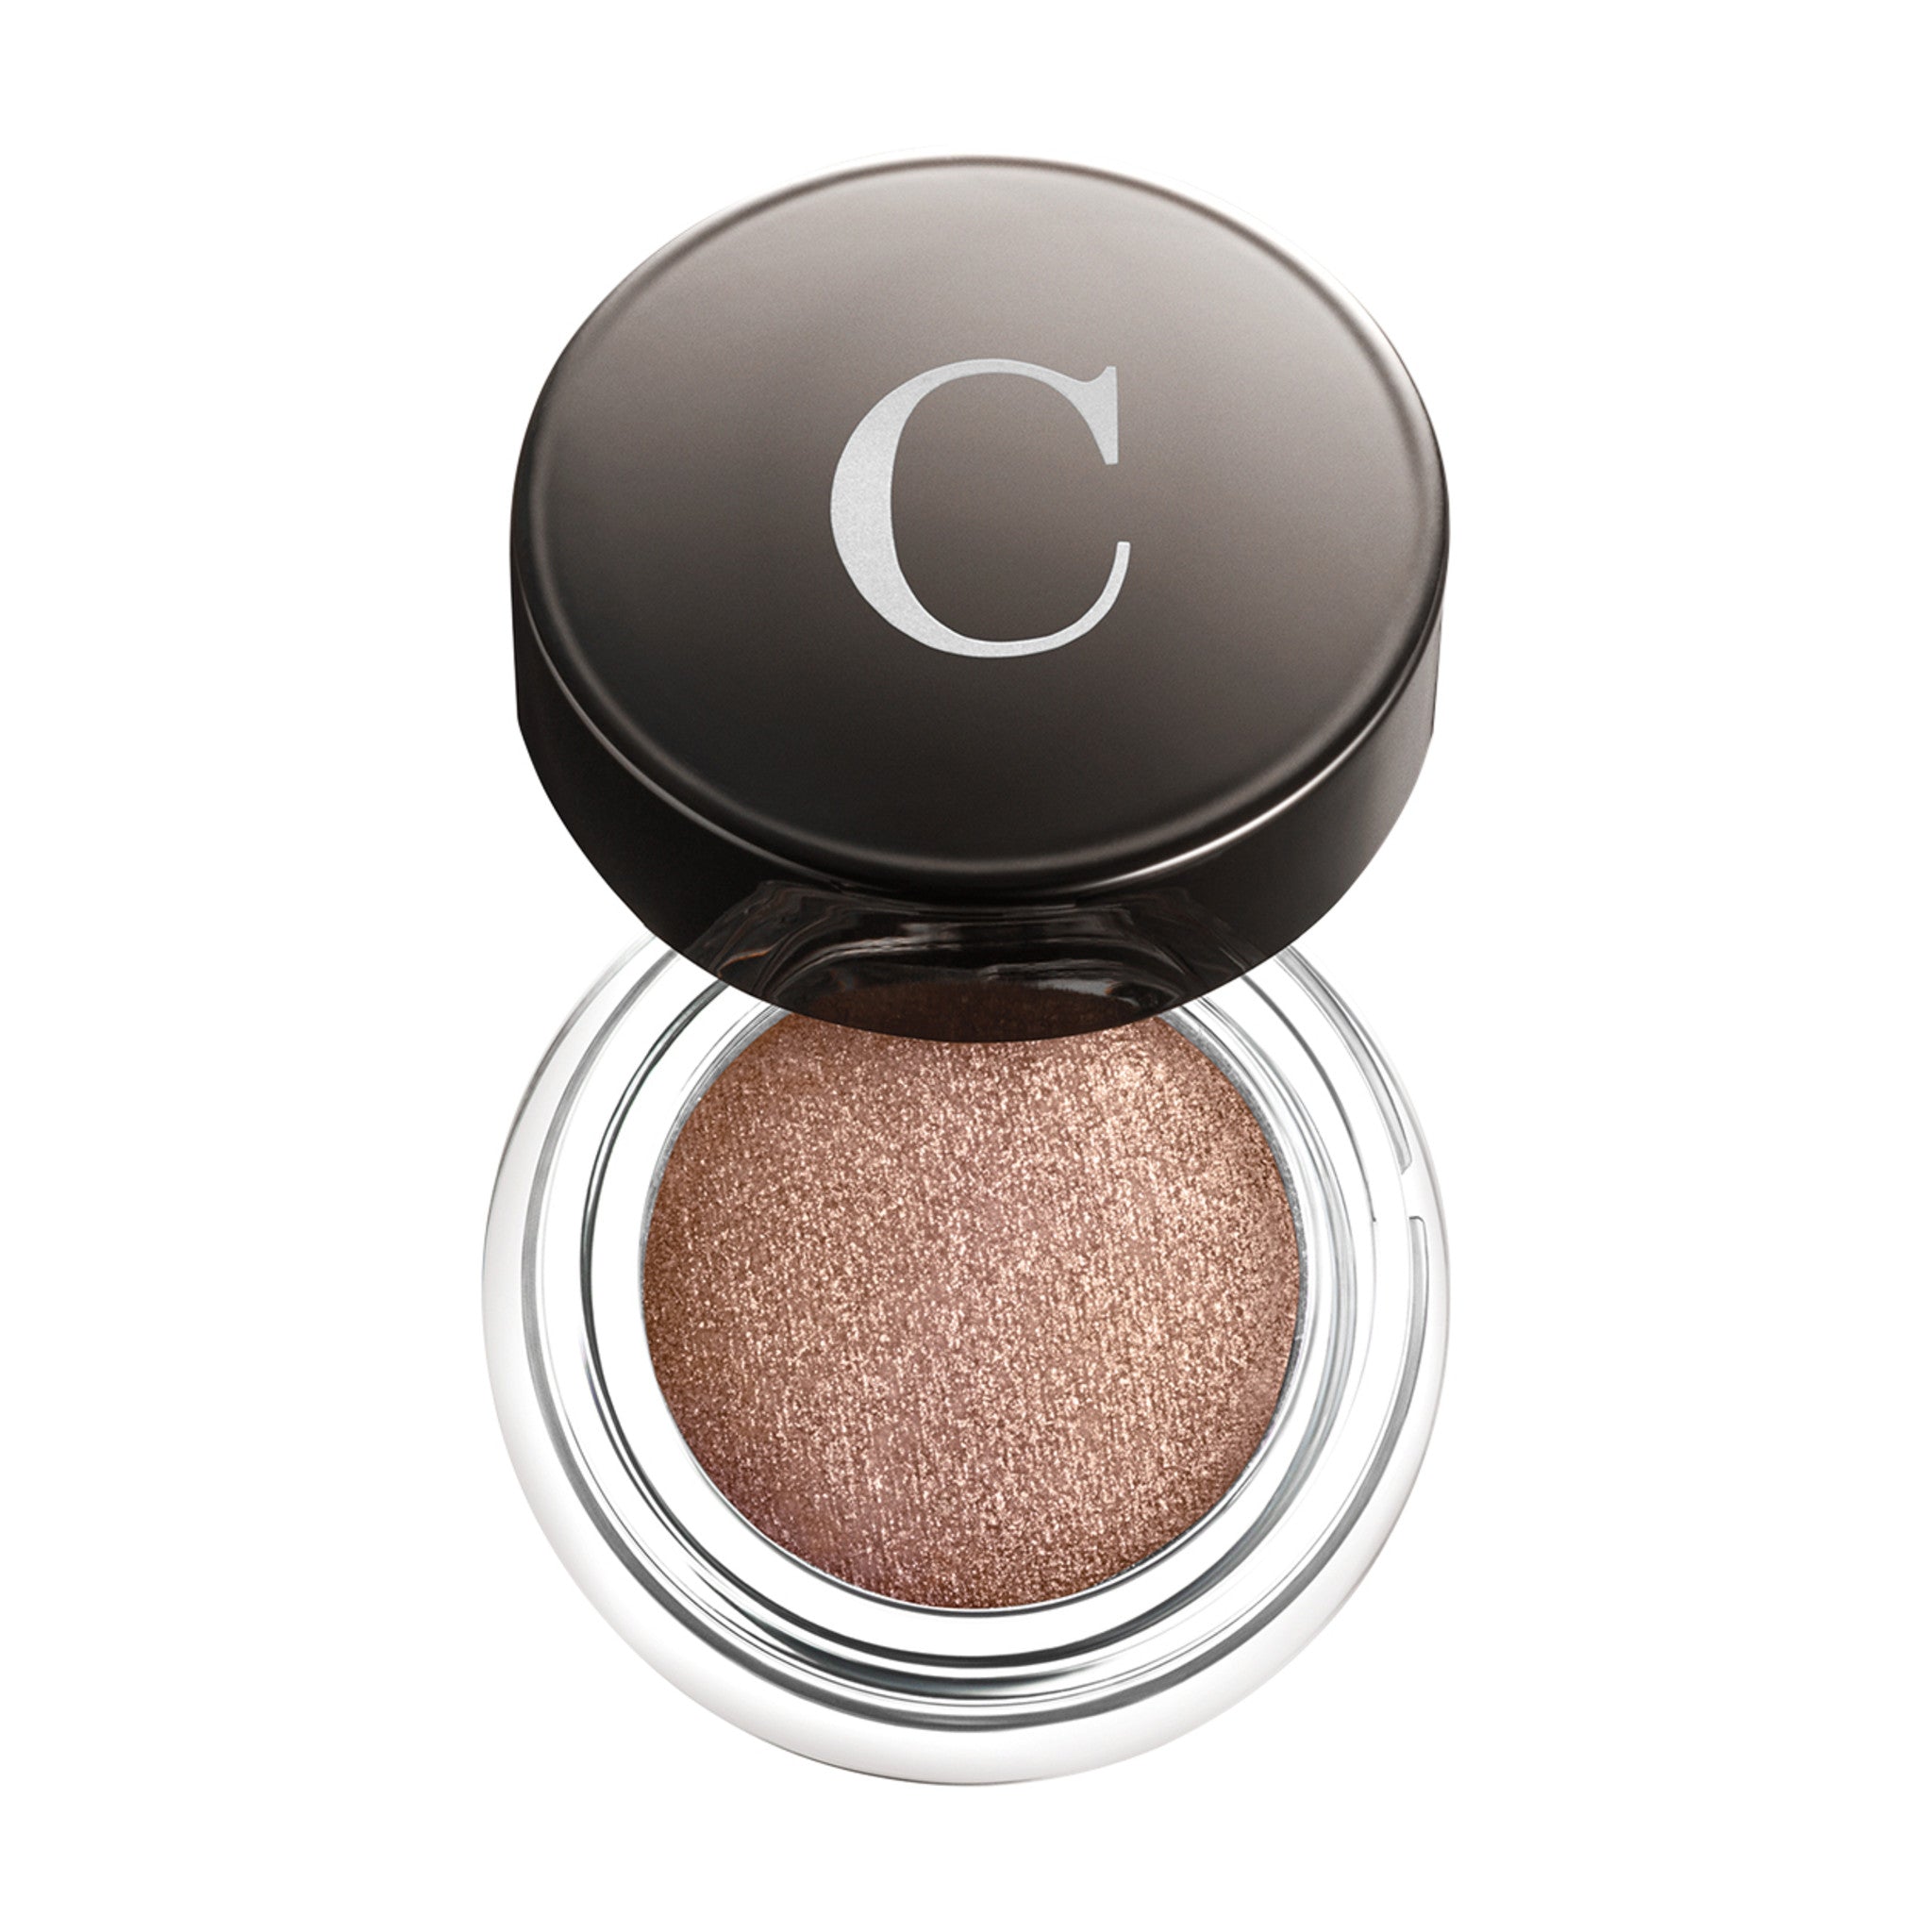 Chantecaille Mermaid Eye Color Color/Shade variant: Copper main image.